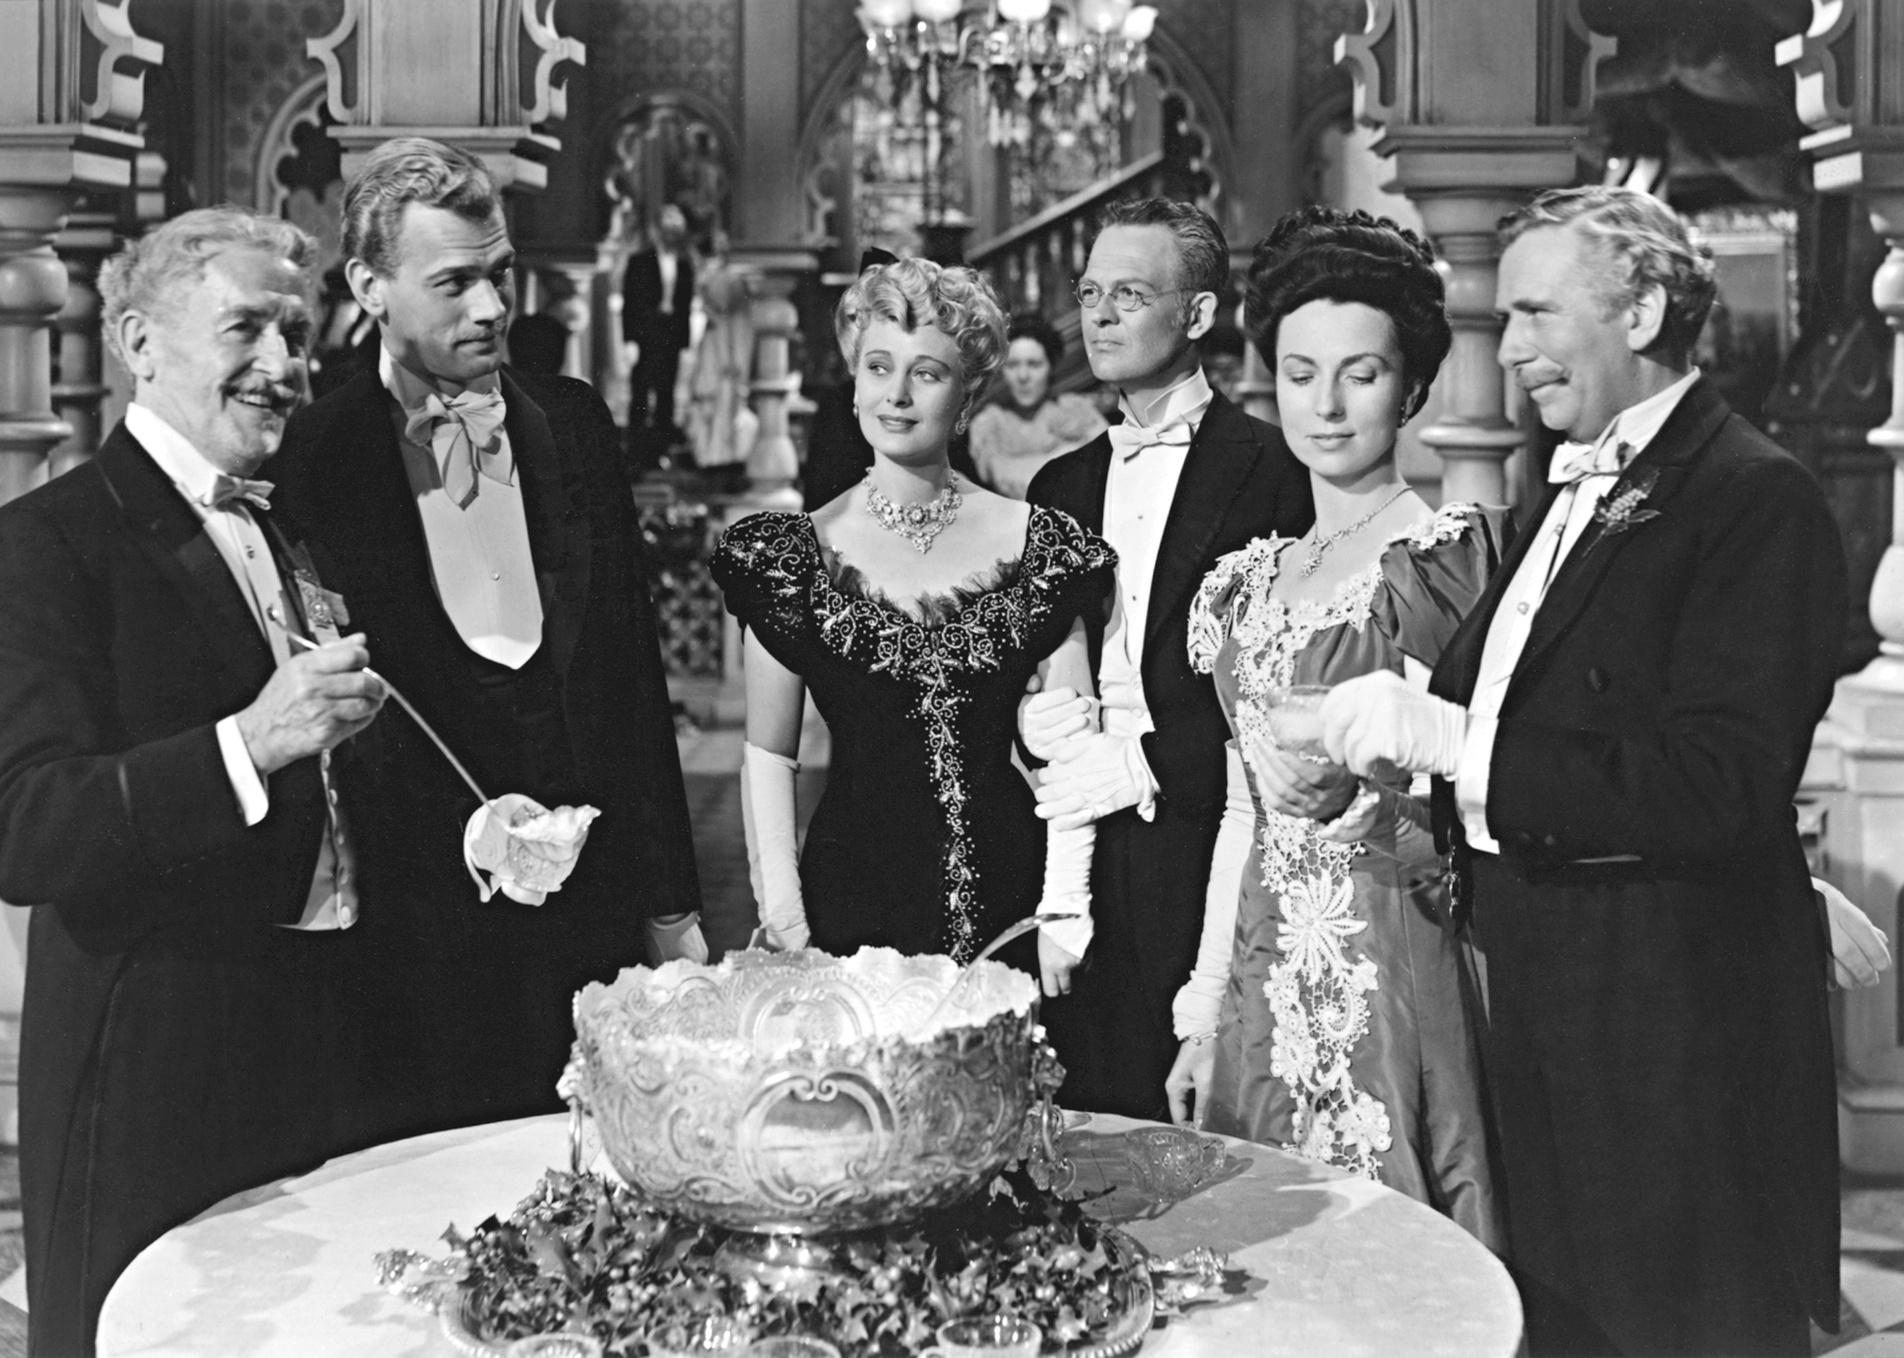 Actors Joseph Cotten, Agnes Moorehead, Richard Bennett, Ray Collins, Dolores Costello, and Don Dillaway in a scene from ‘The Magnificent Ambersons.’